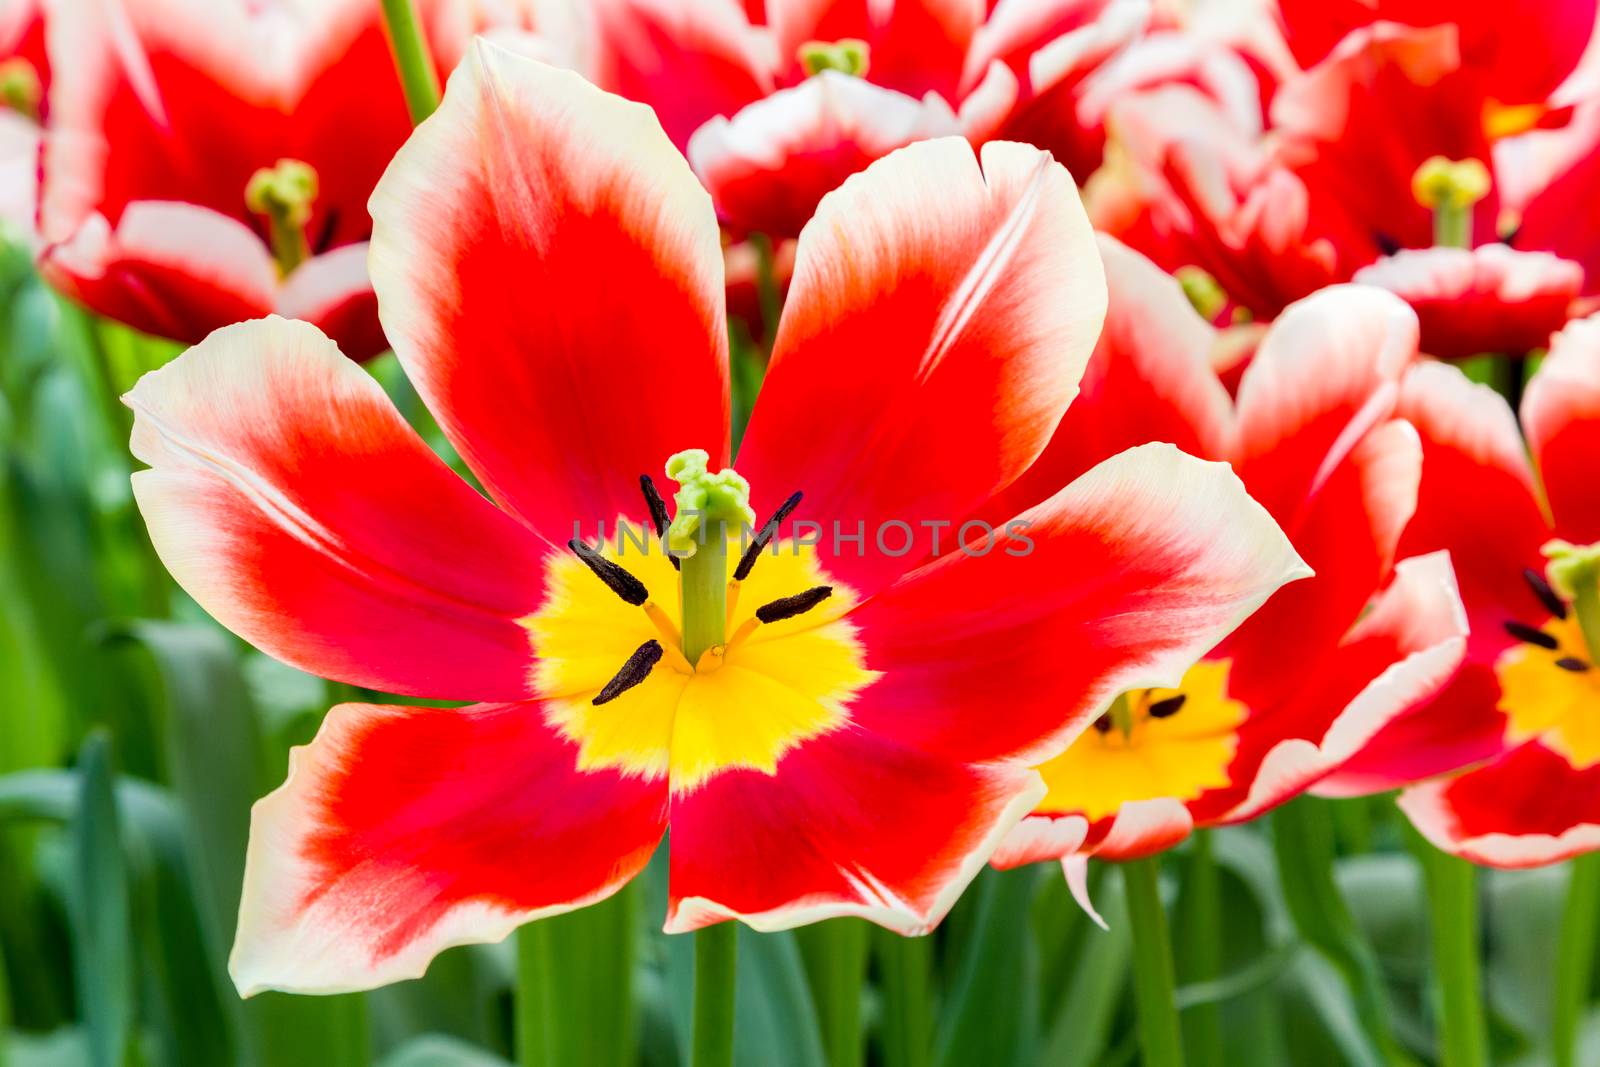 Red white tulip in field of tulips by BenSchonewille